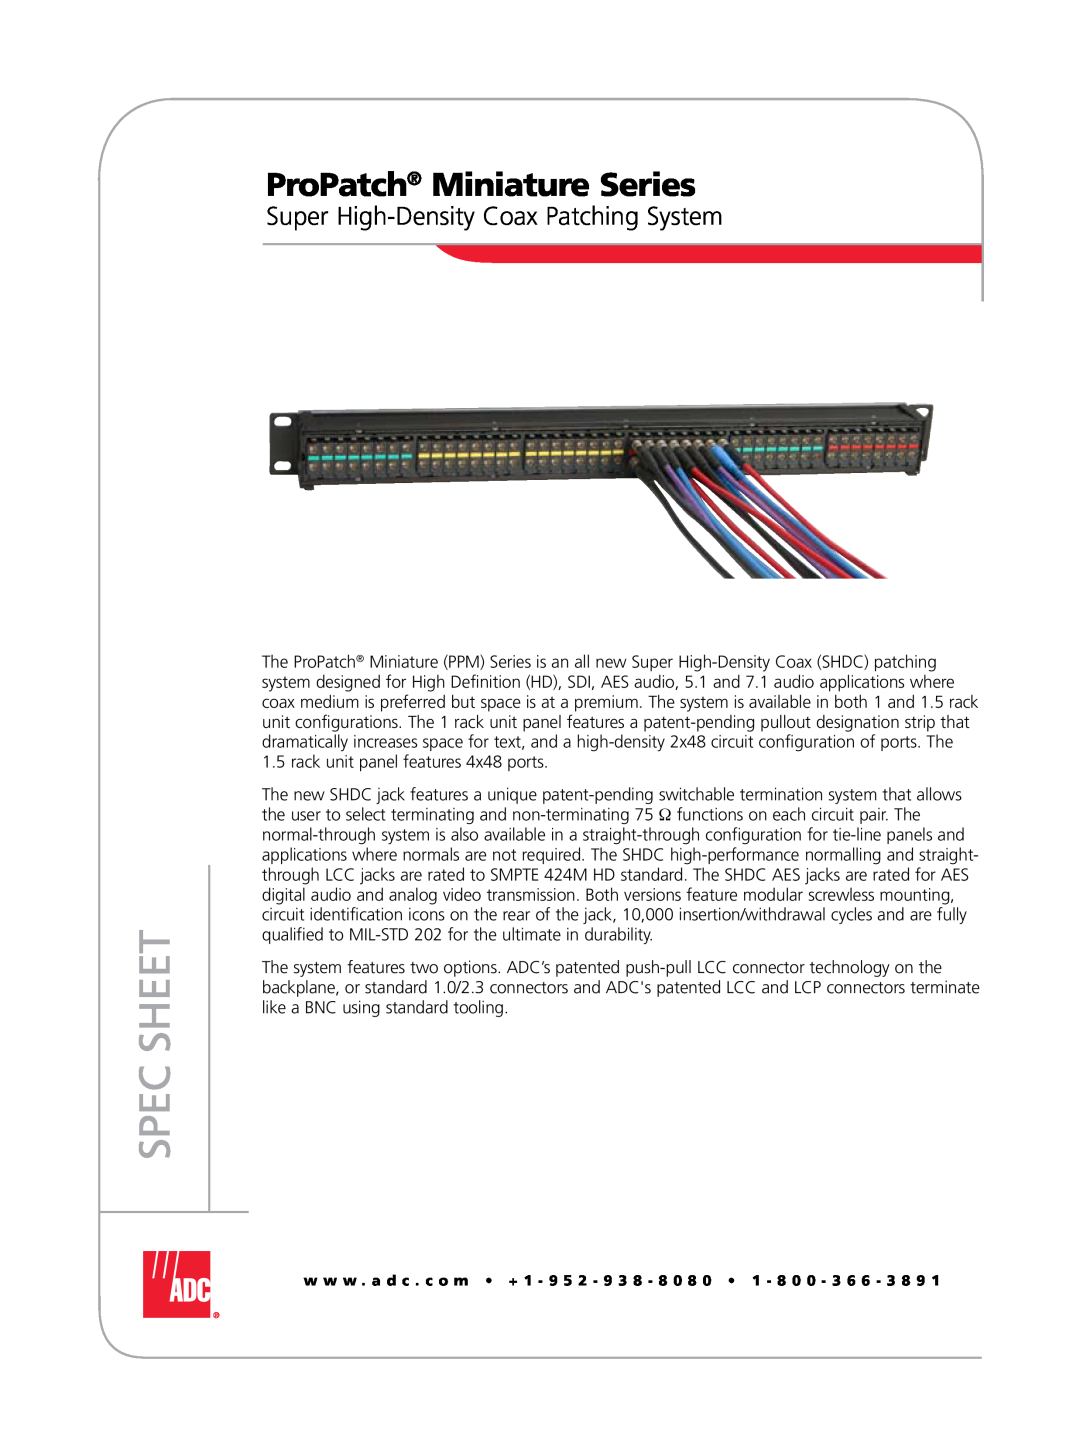 ADC manual ProPatch Miniature Series, Super High-Density Coax Patching System, Spec Sheet 